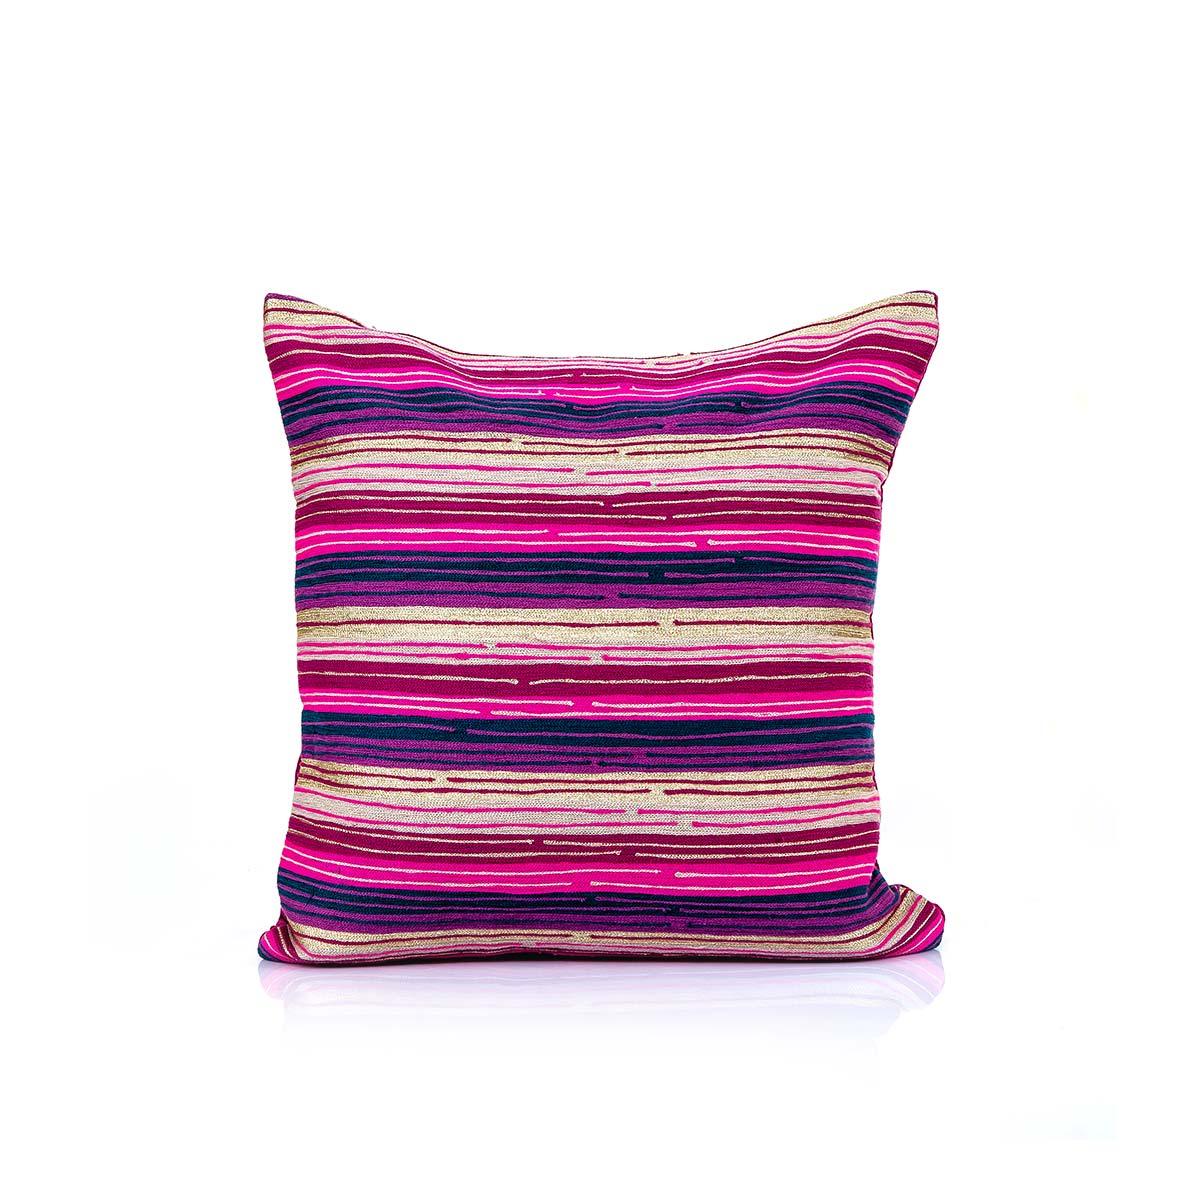 Anando 20 In X 20 In Pink & Blue Cushion Cover - Home4u